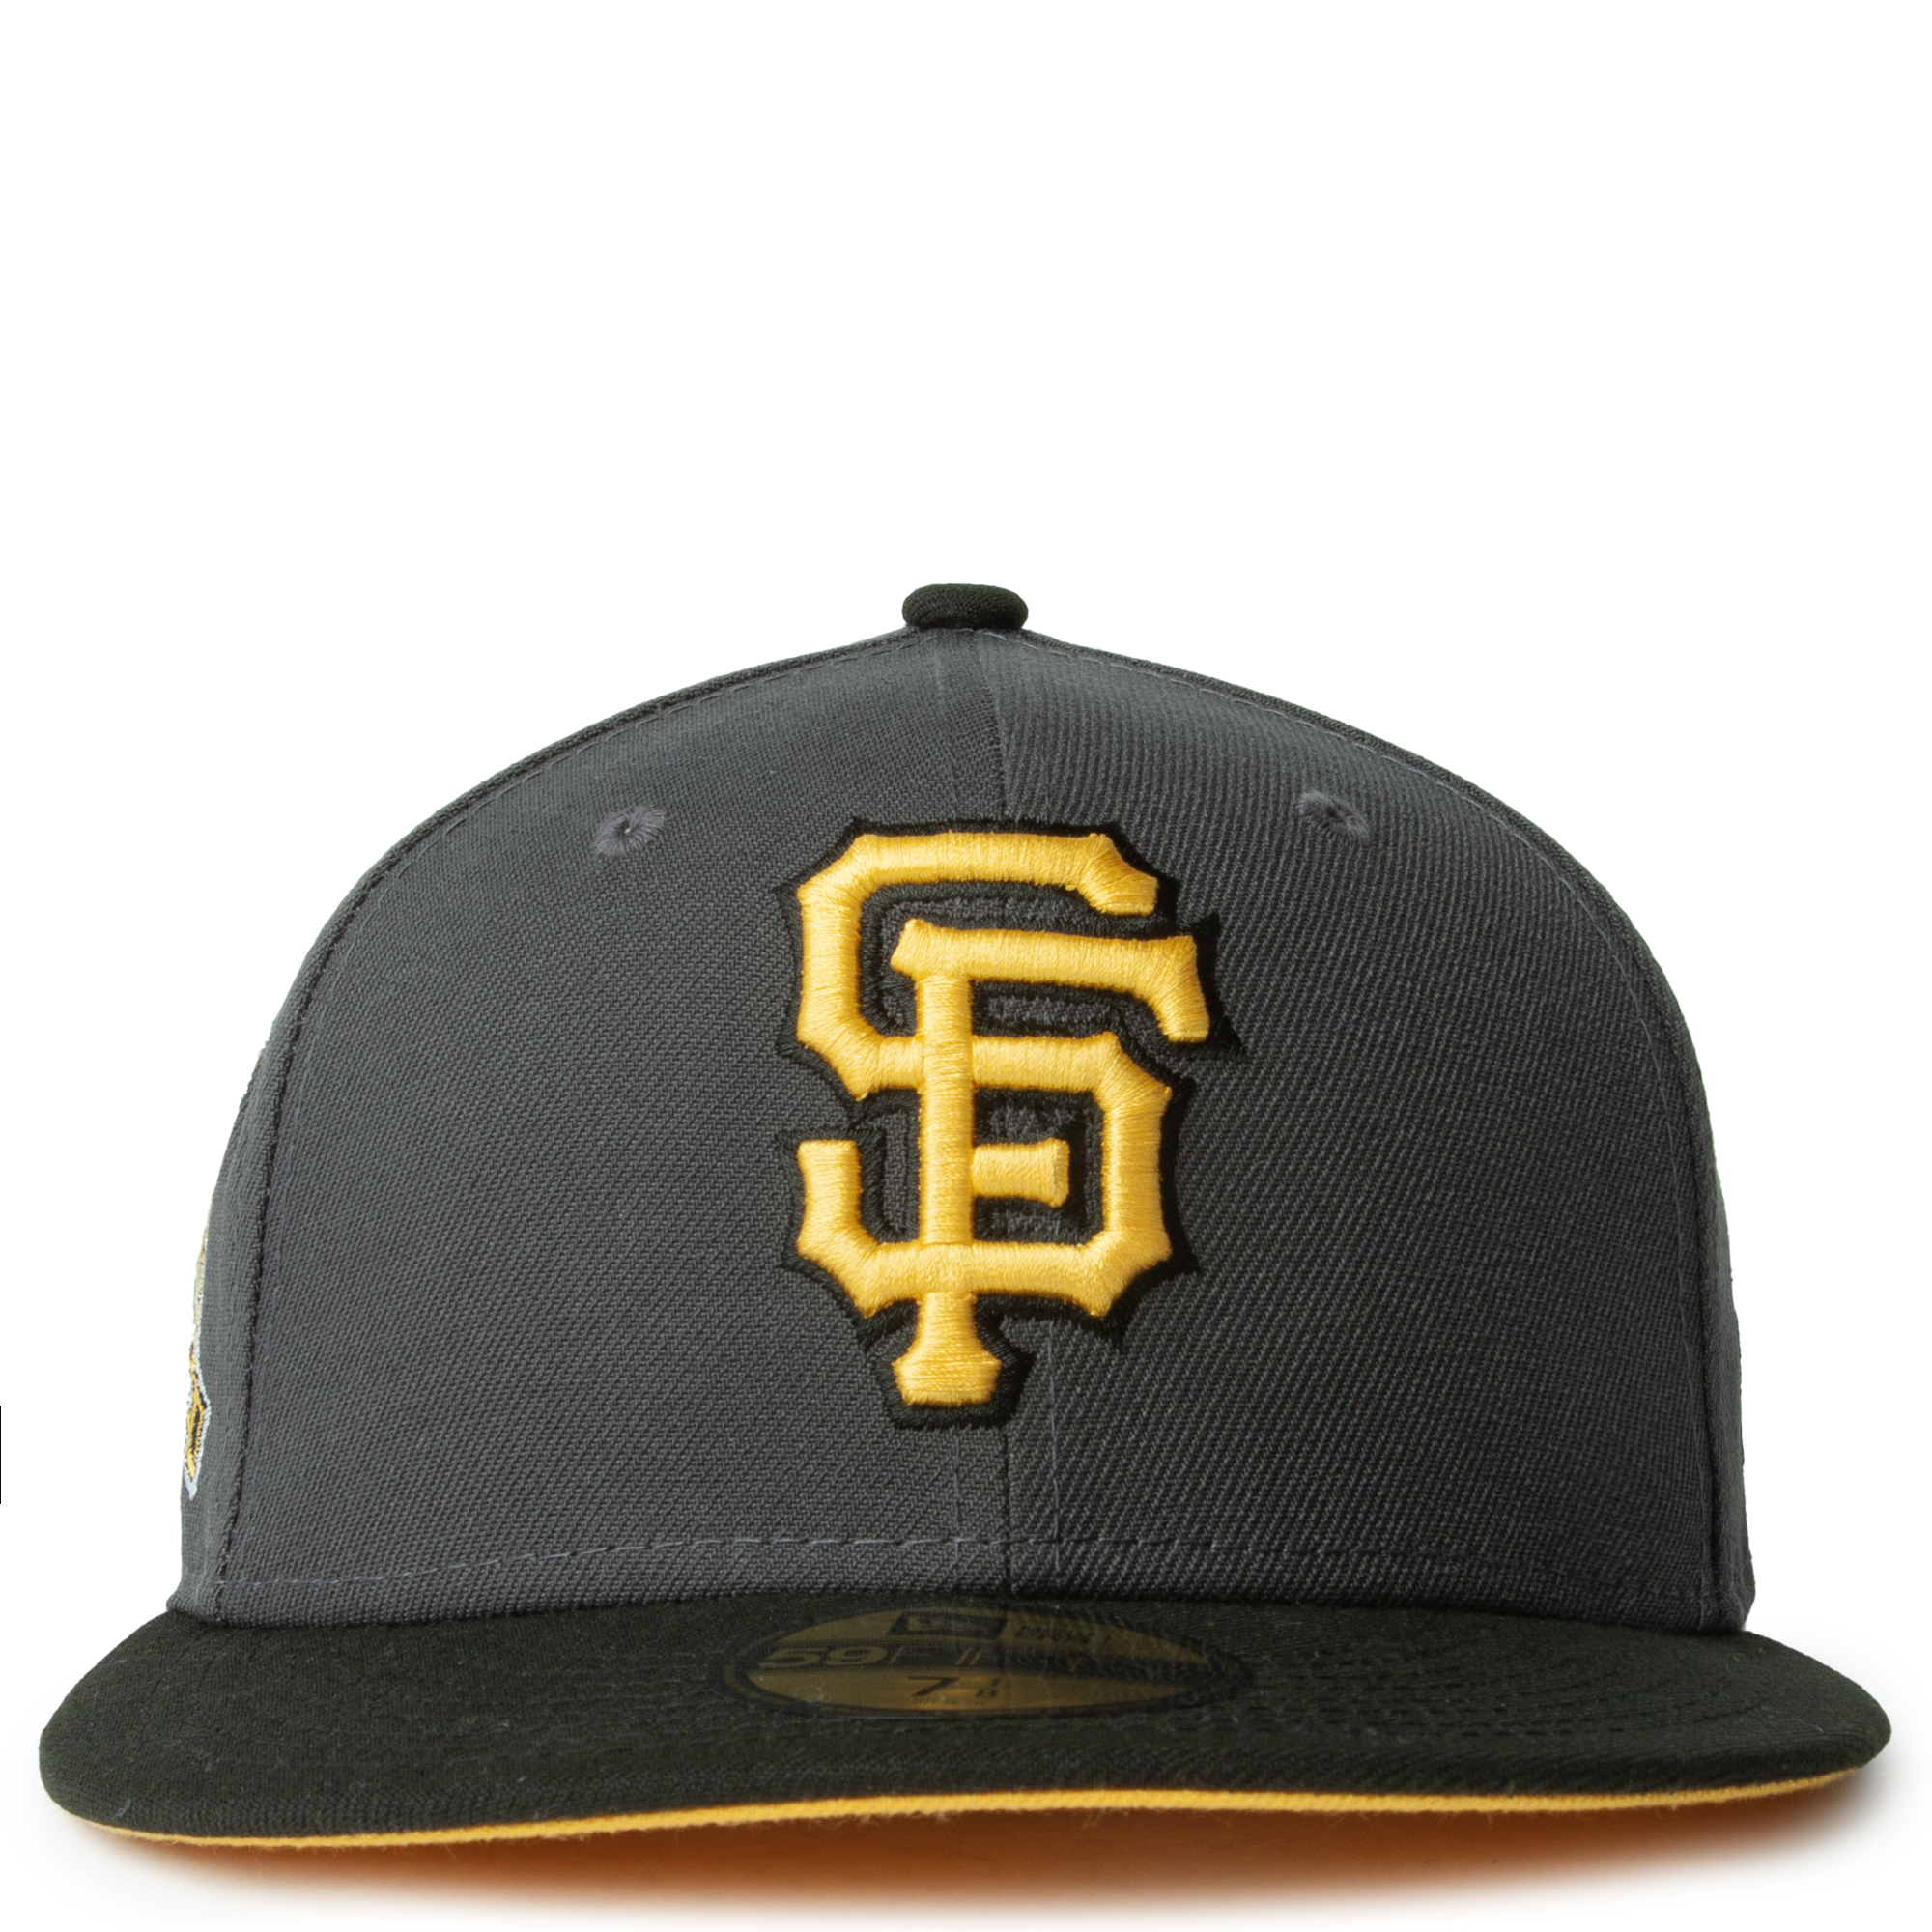 New Era Caps San Francisco Giants Black Gray 59FIFTY Fitted Hat